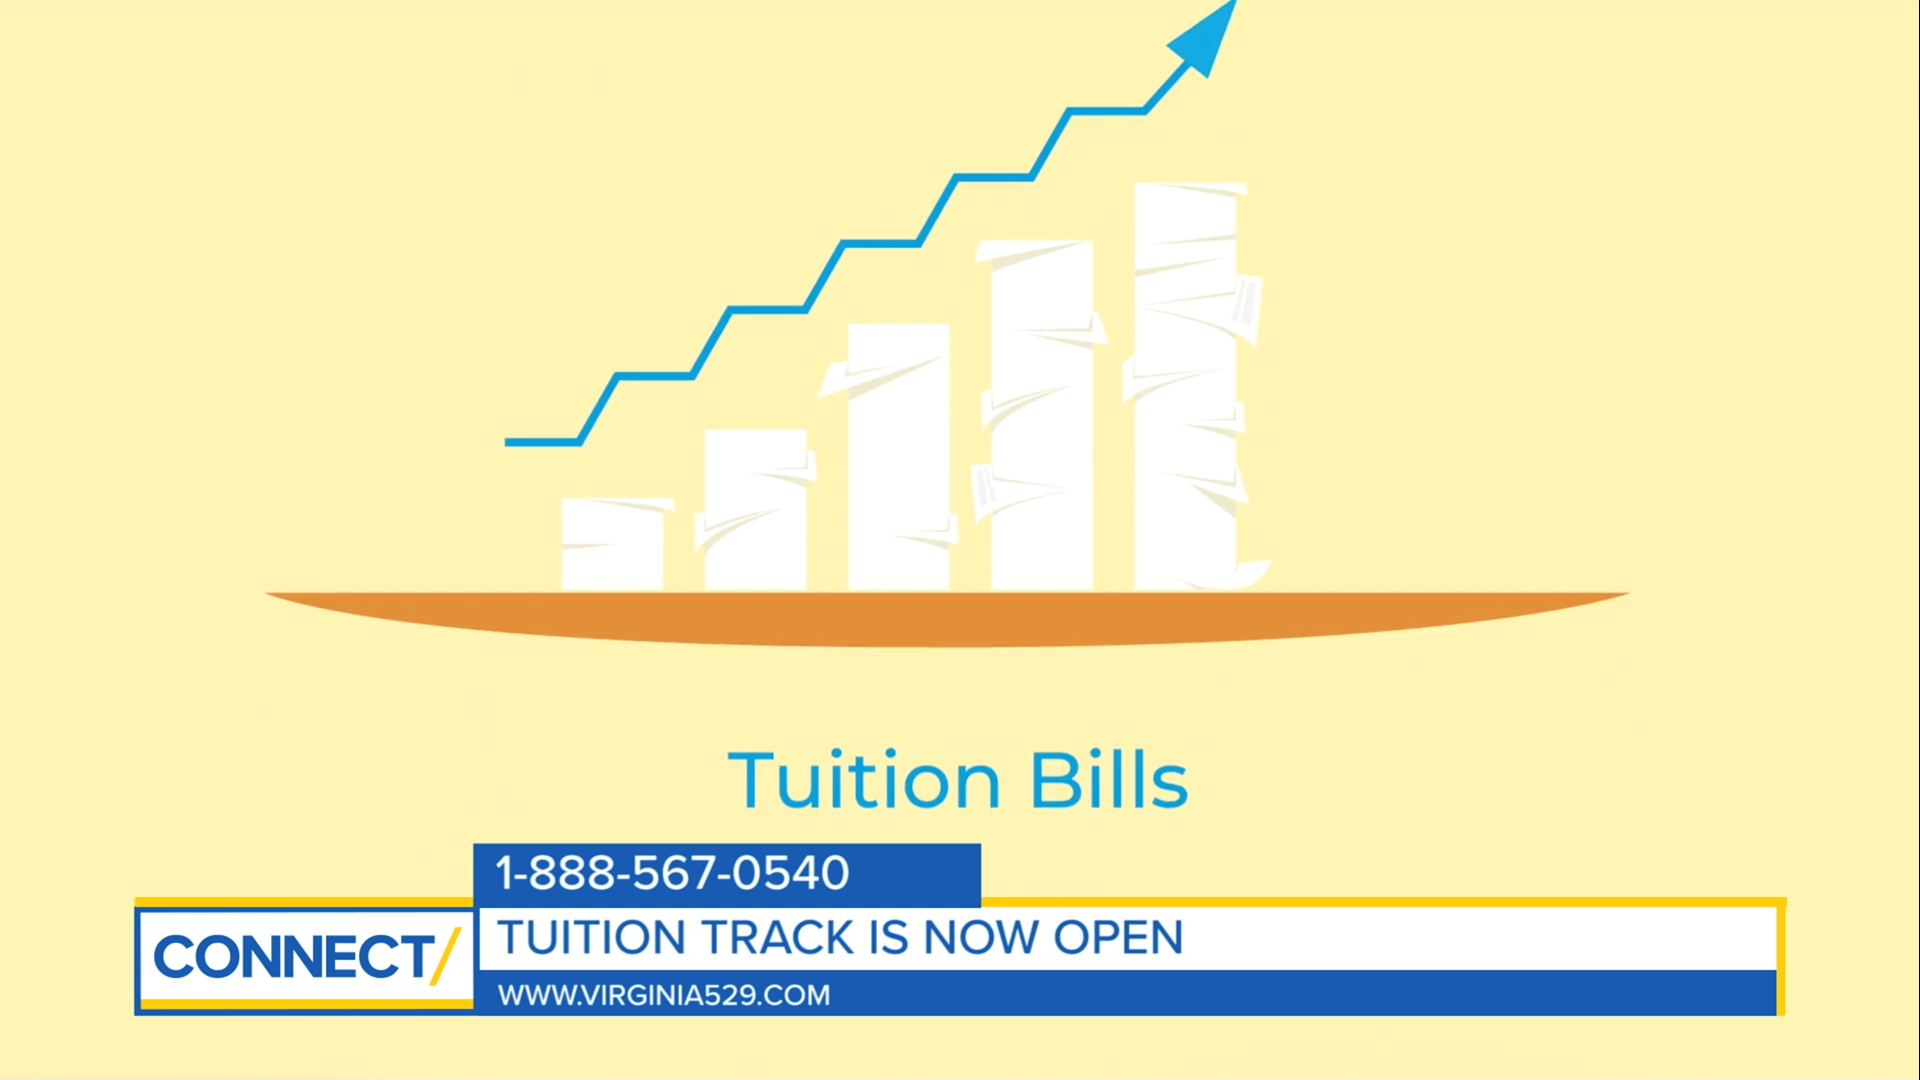 Many families fall short when they're trying to save for college. Tuition Track helps make sure your savings grow at the same rate as tuition costs.